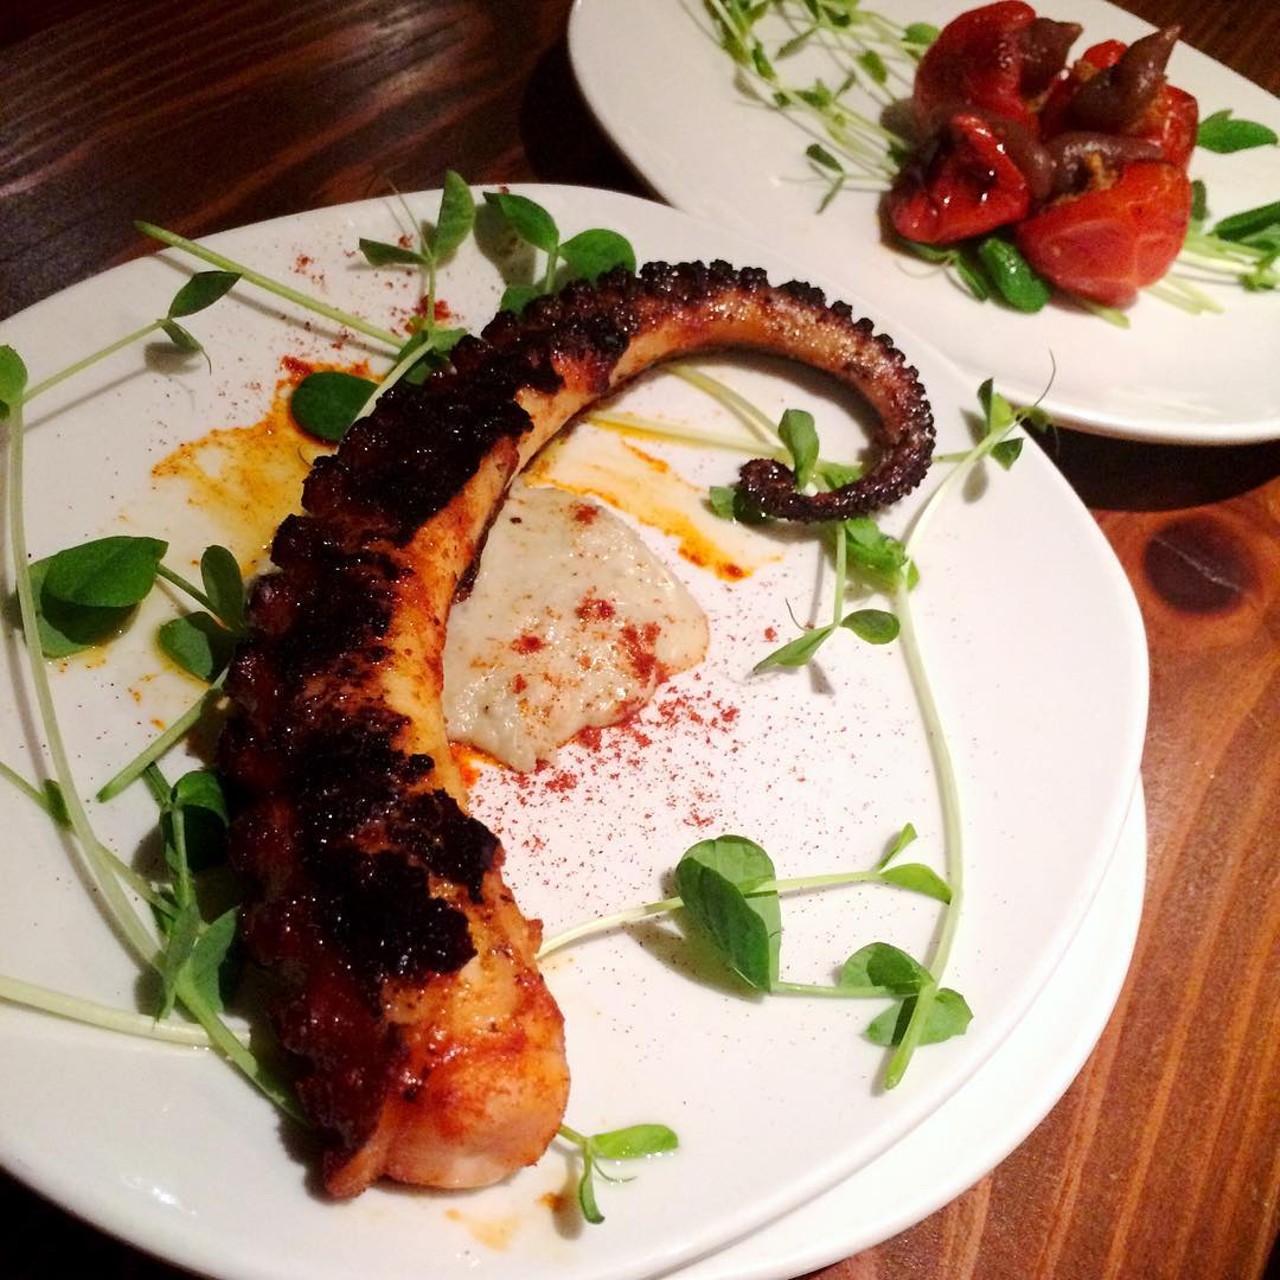 Charred Octopus and Stuffed Pepper.